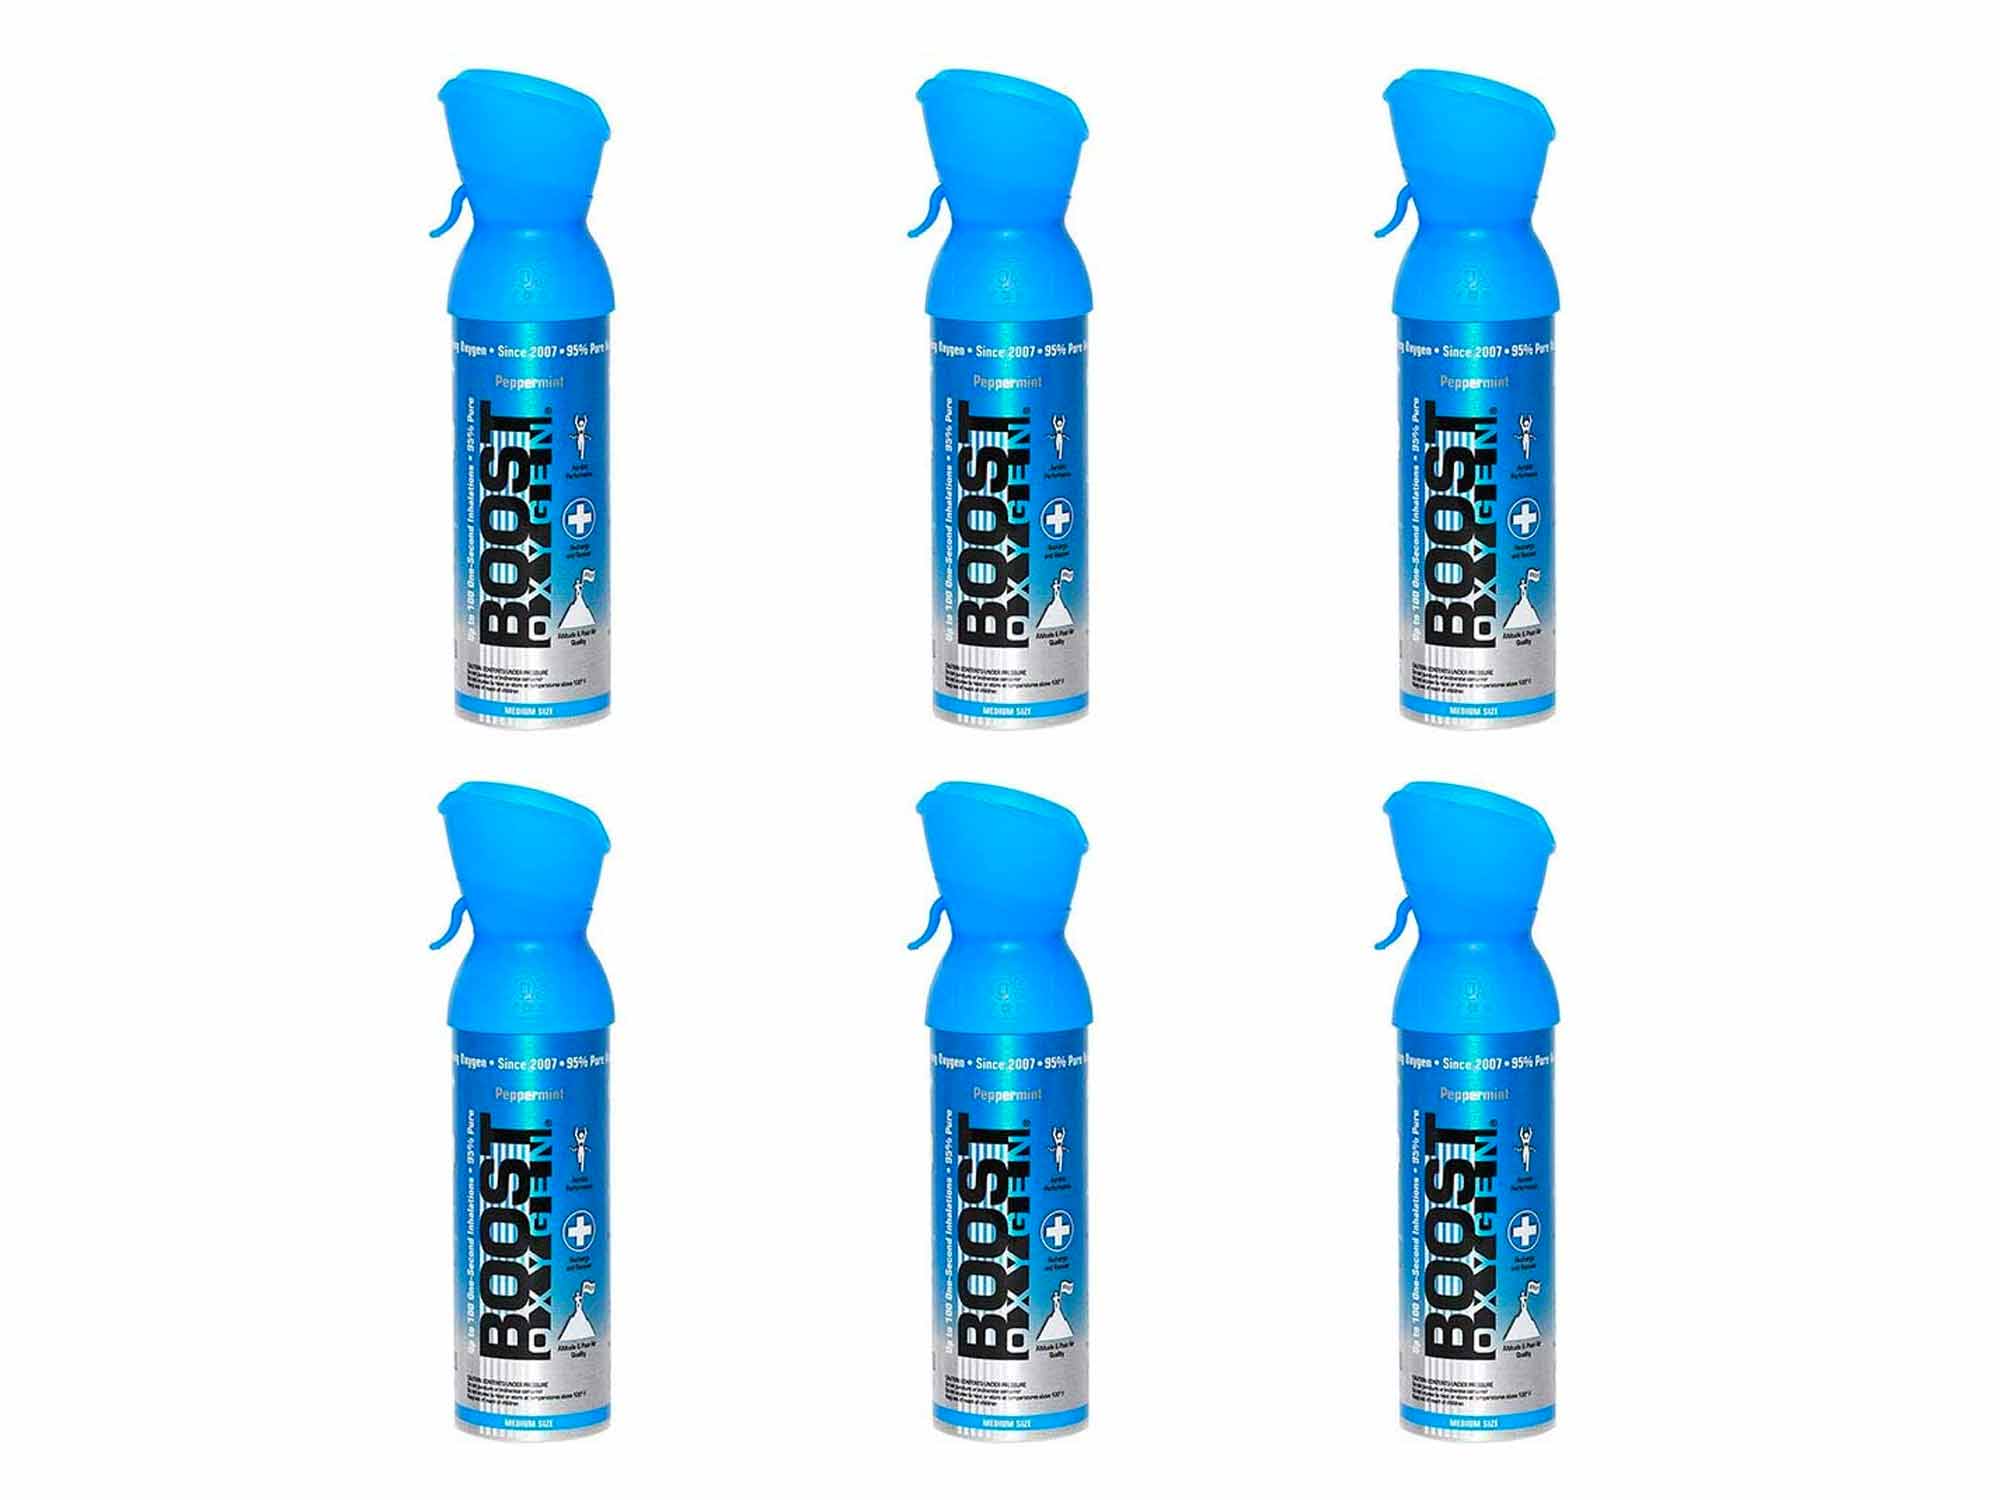 Boost Oxygen Supplemental Oxygen to Go | All-Natural Respiratory Support for Health, Wellness, Performance, Recovery and Altitude (5 Liter Canisters, Peppermint, 6-Pack)